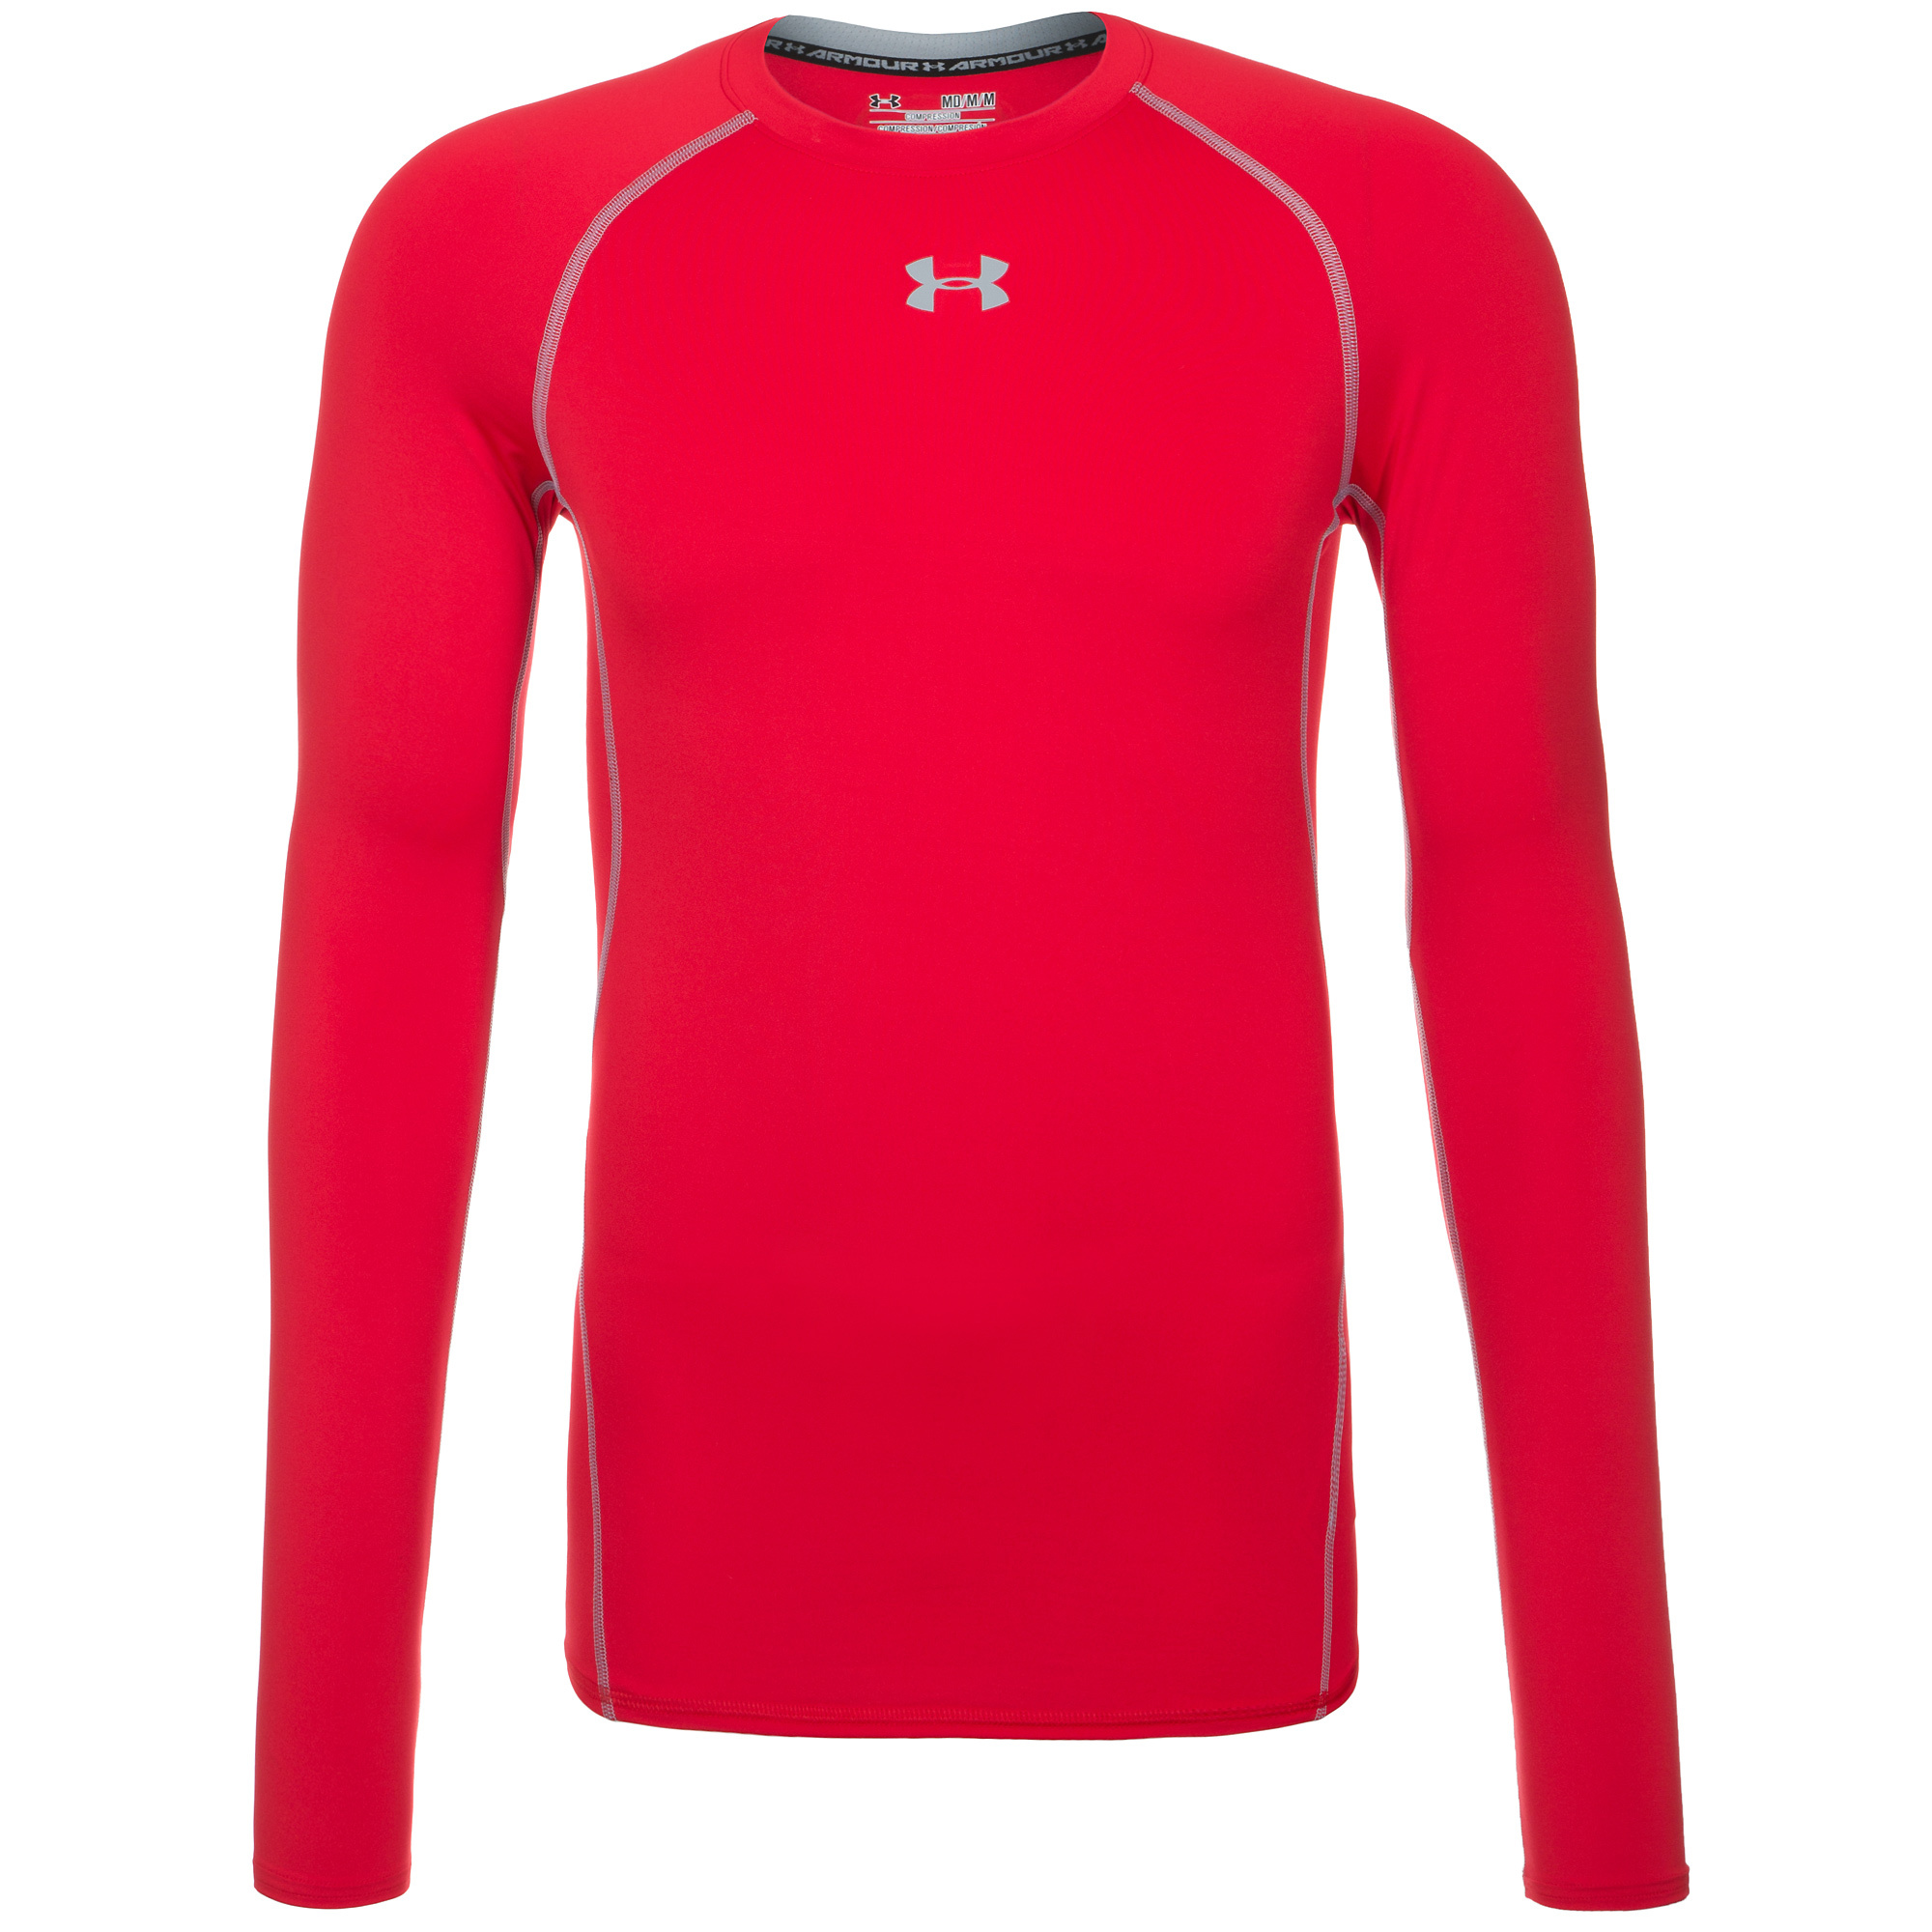 UNDER ARMOUR Funktionsshirt in Rot 